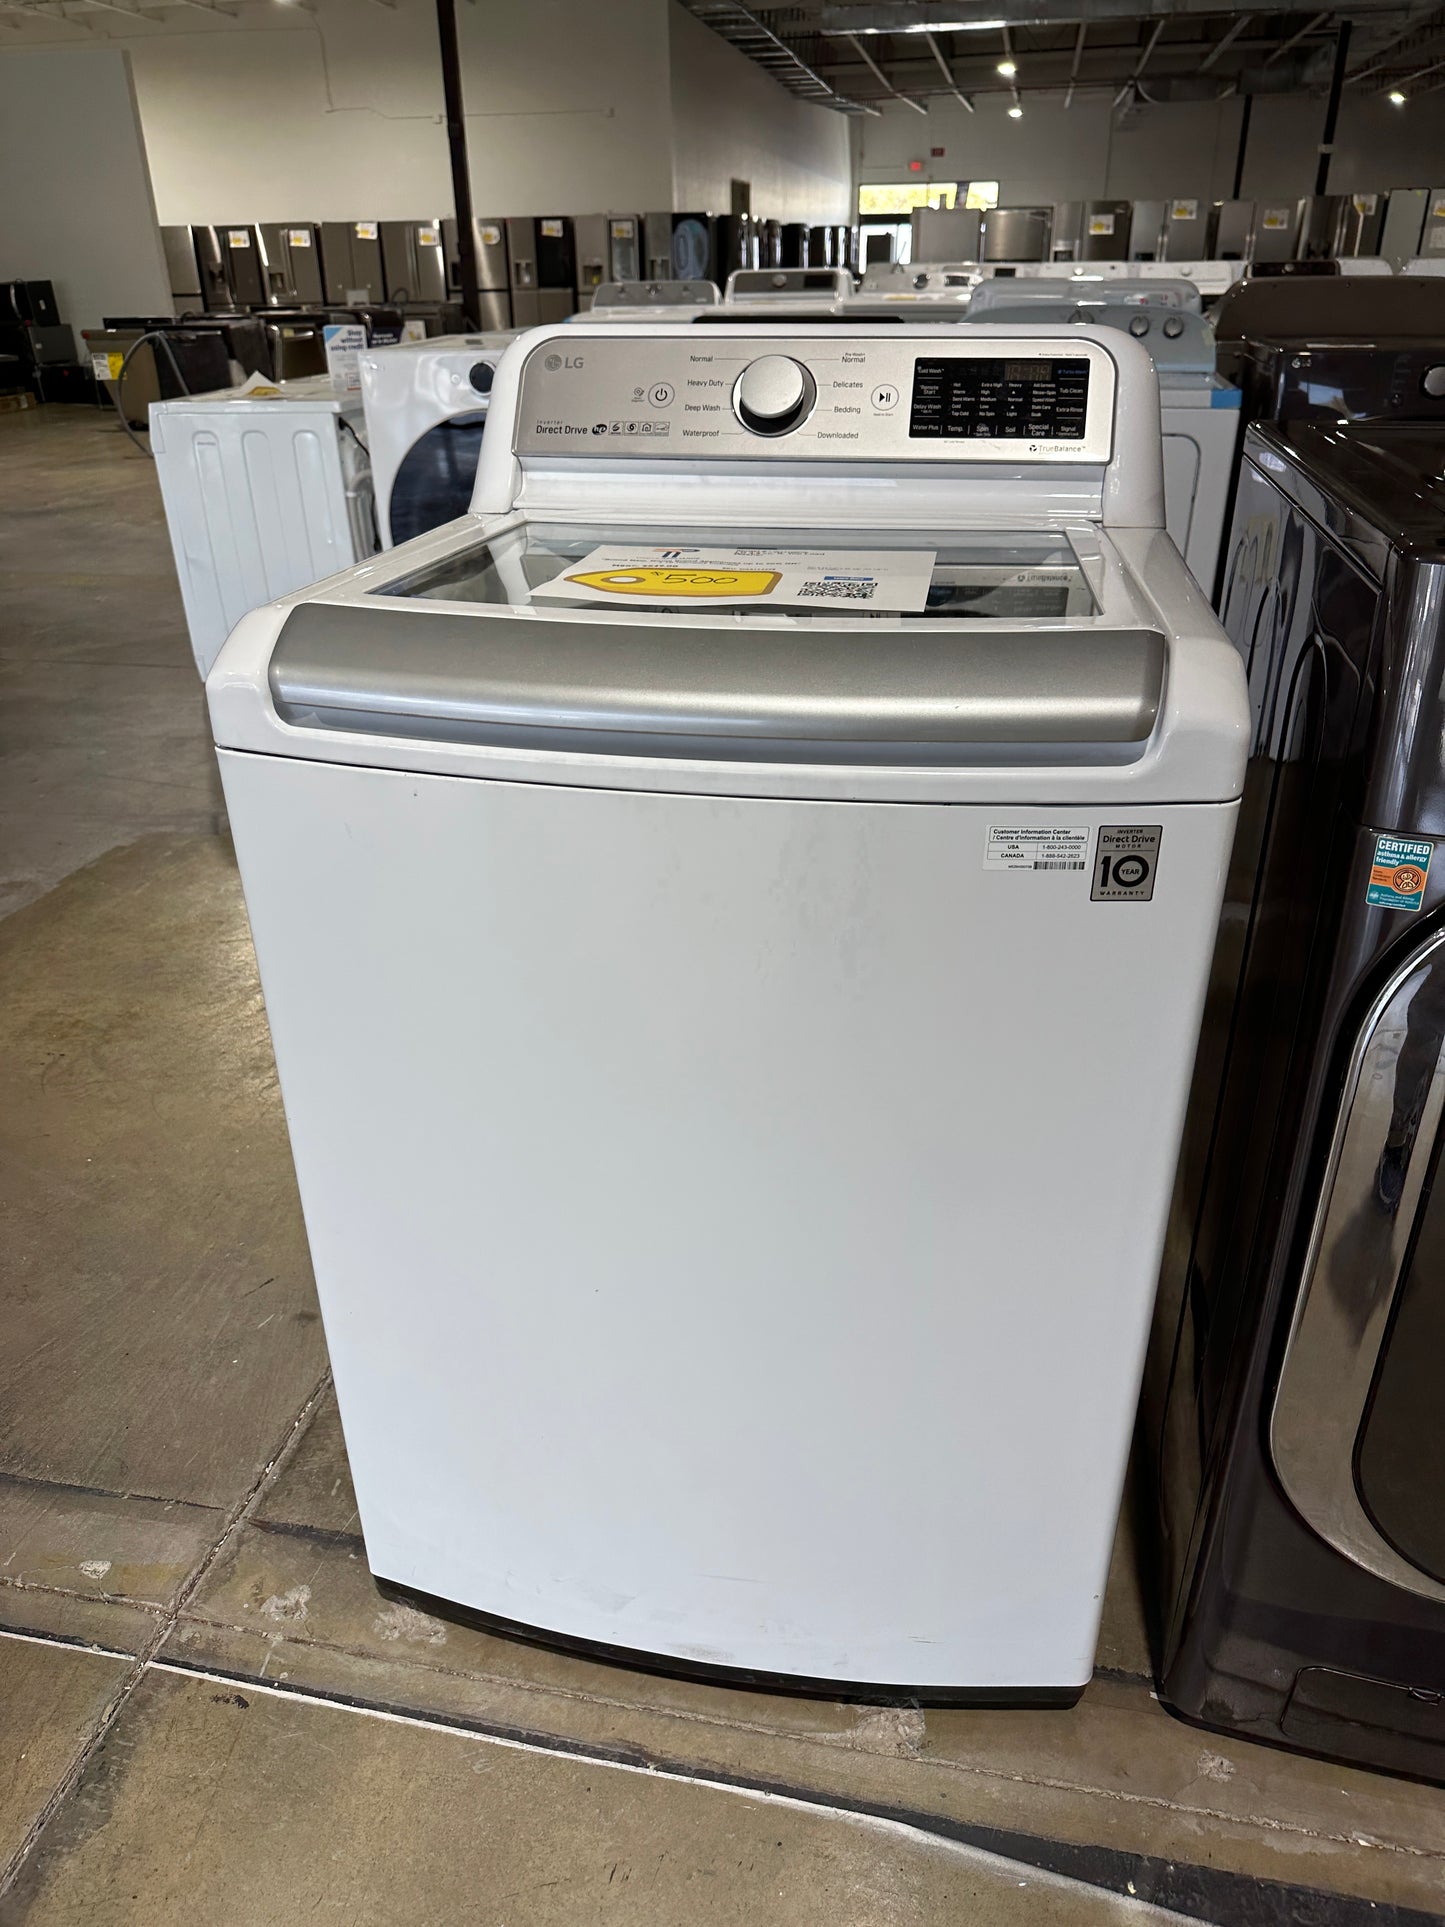 LG - 4.1 Cu. Ft. Top Load Washer with SlamProof Glass Lid - White  MODEL: WT7100CW  WAS11423S